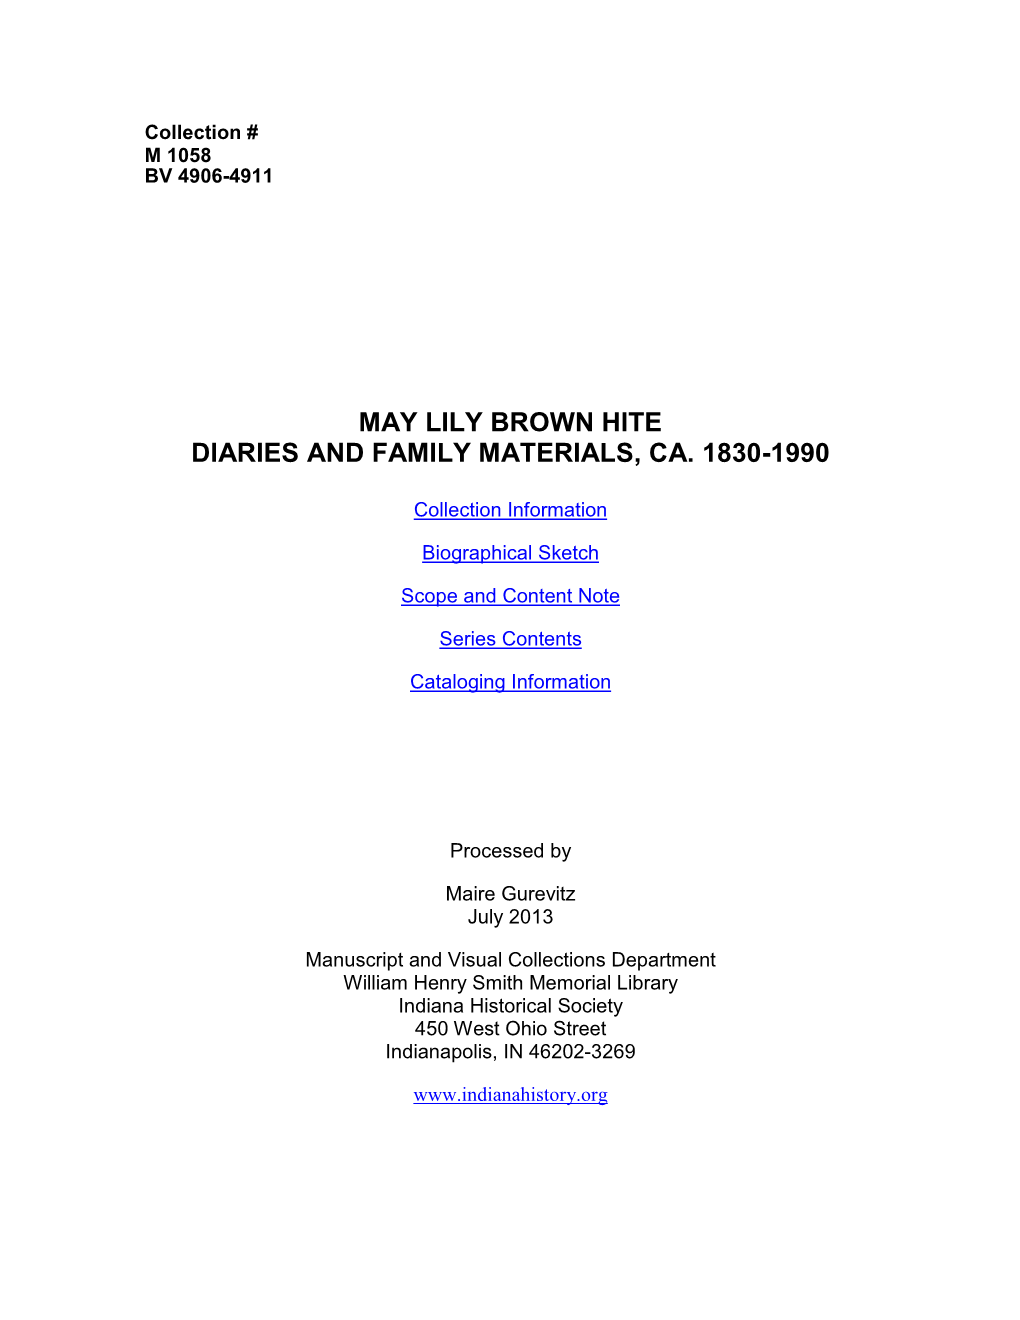 May Lily Brown Hite Diaries and Family Materials, Ca